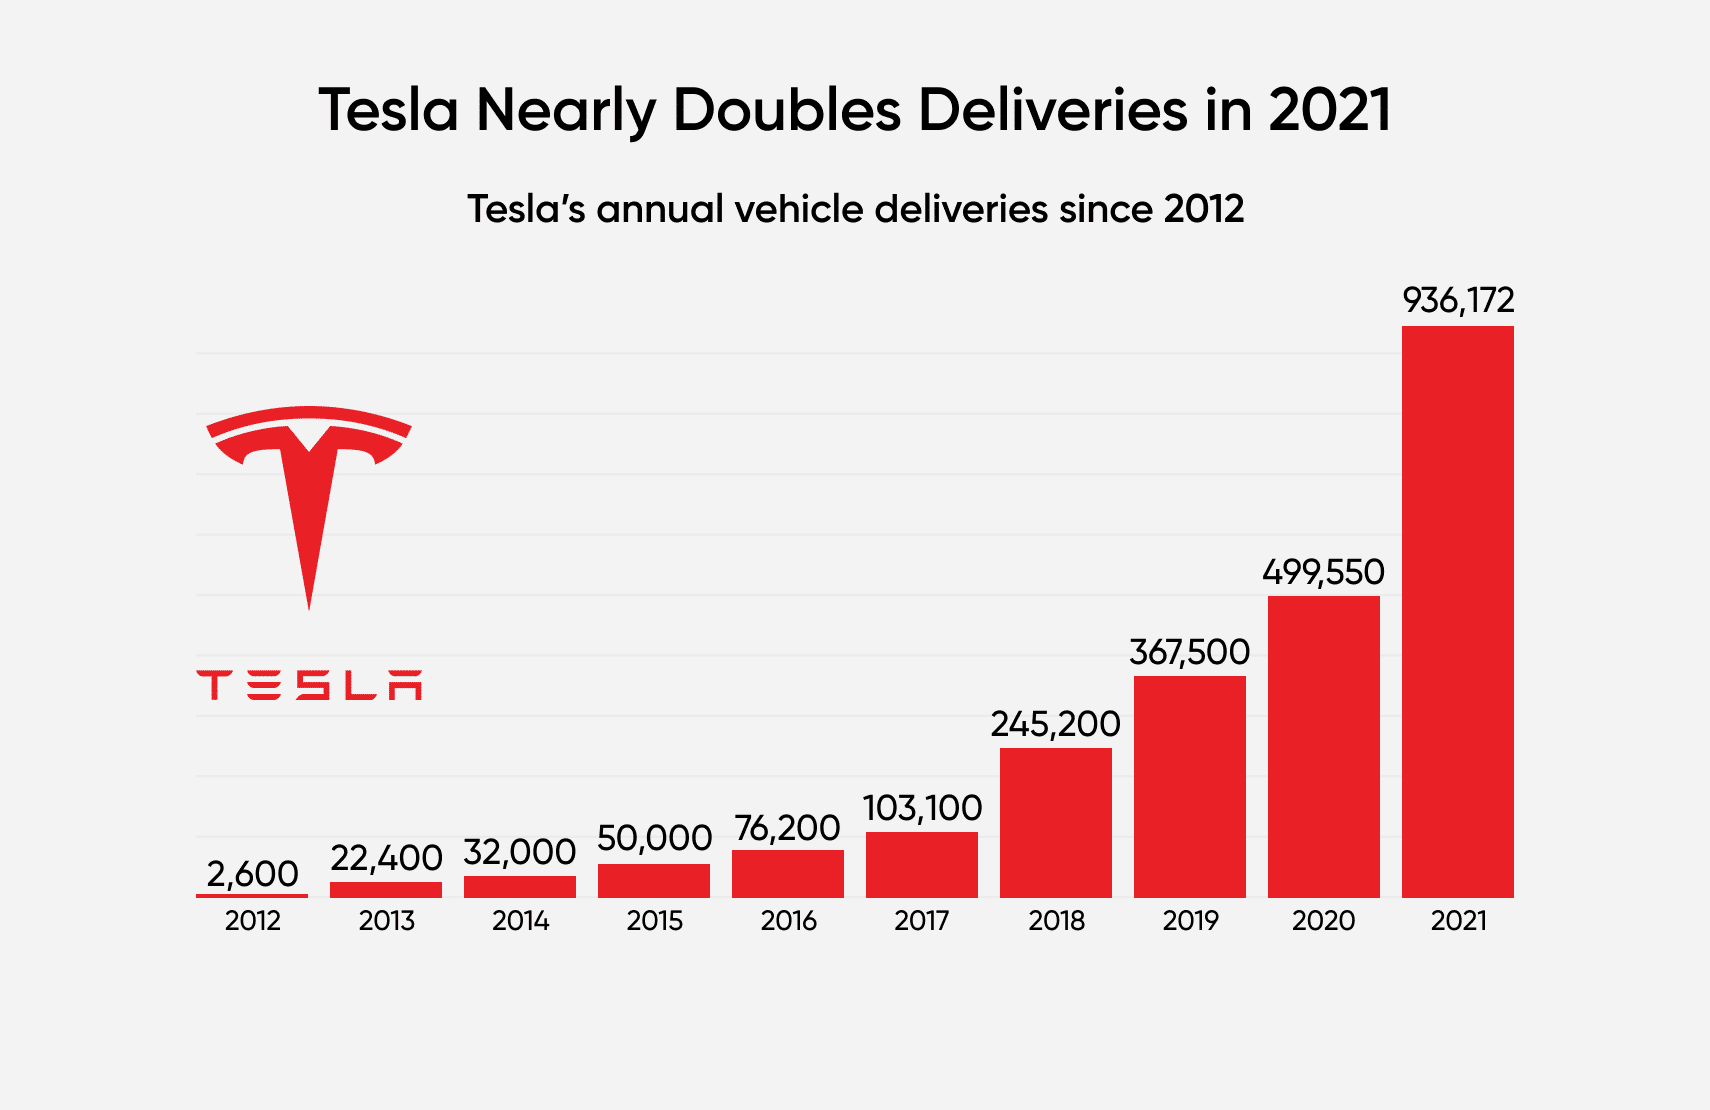 Tesla strategy leads to high deliveries in 2021.